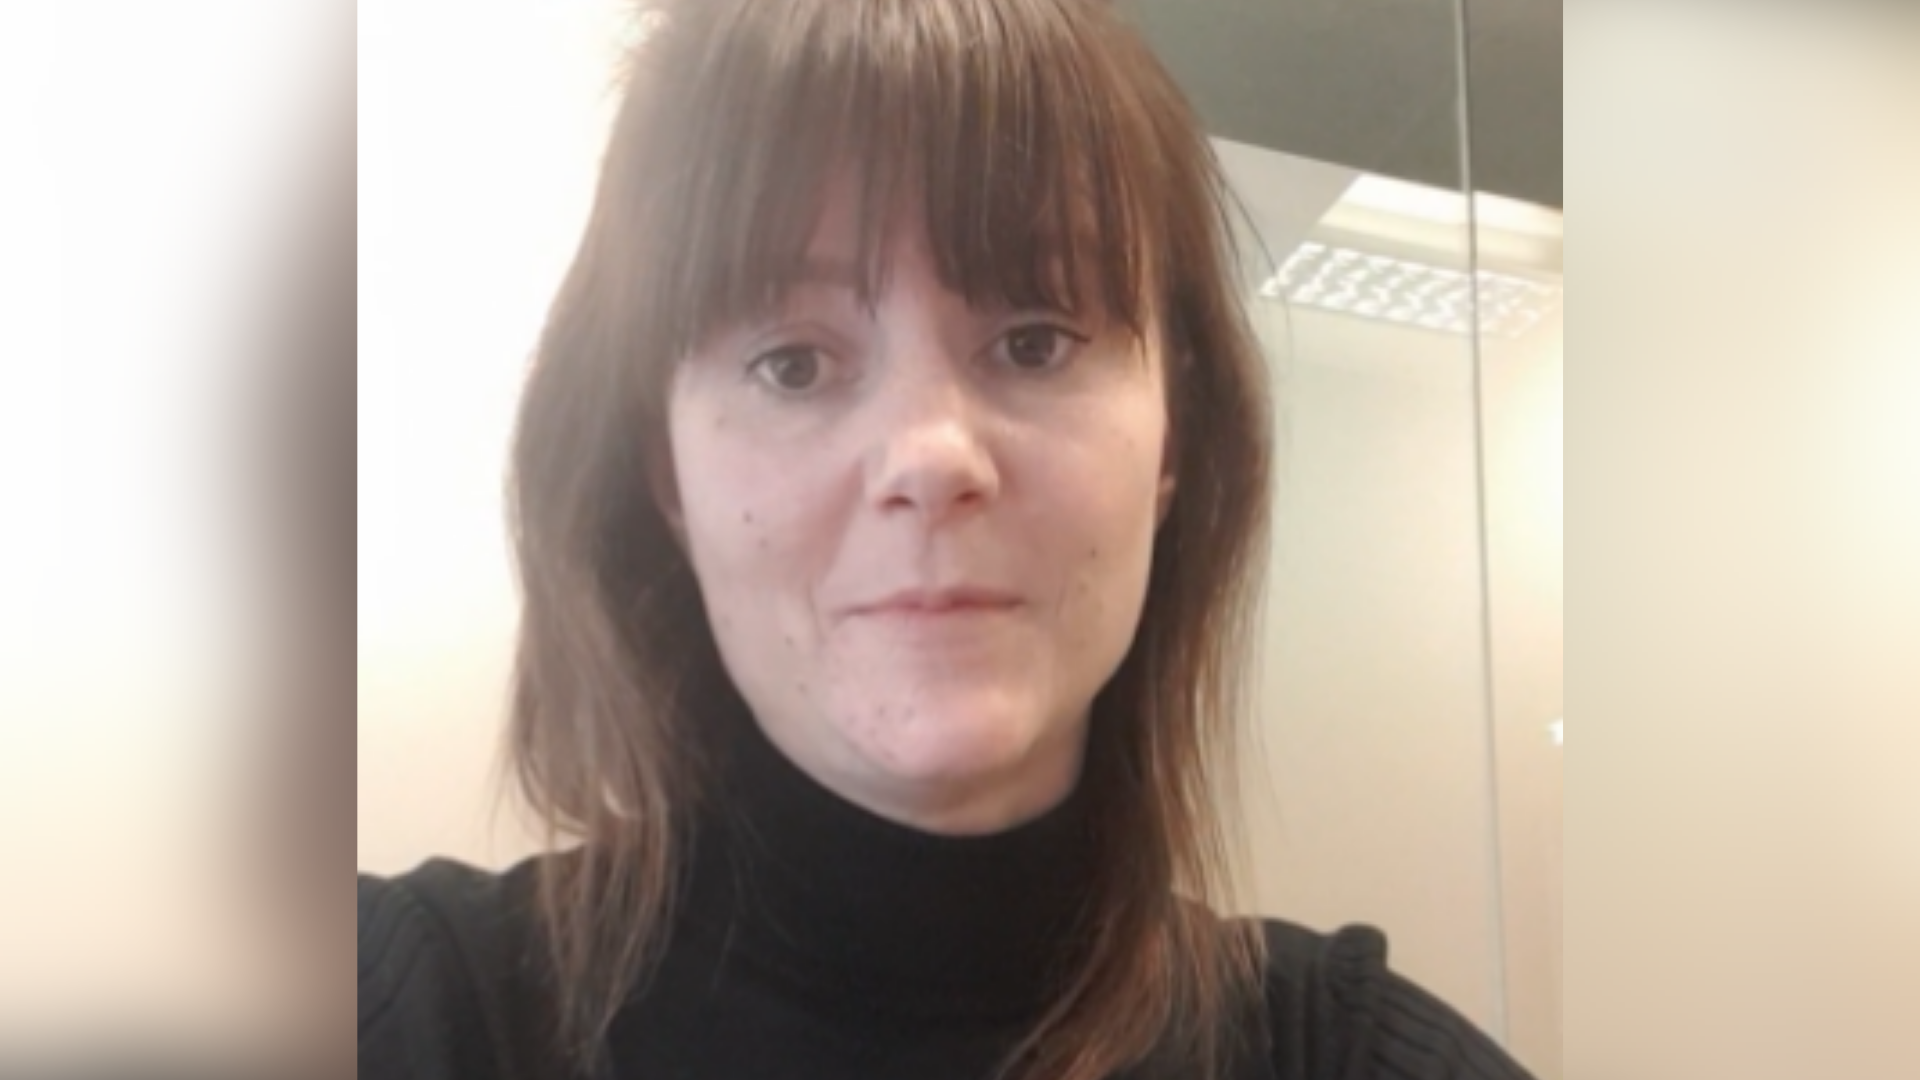 Debbie is a white woman with a long brown fringe and shoulder length brown hair. She wears a black polo neck jumper in this image.